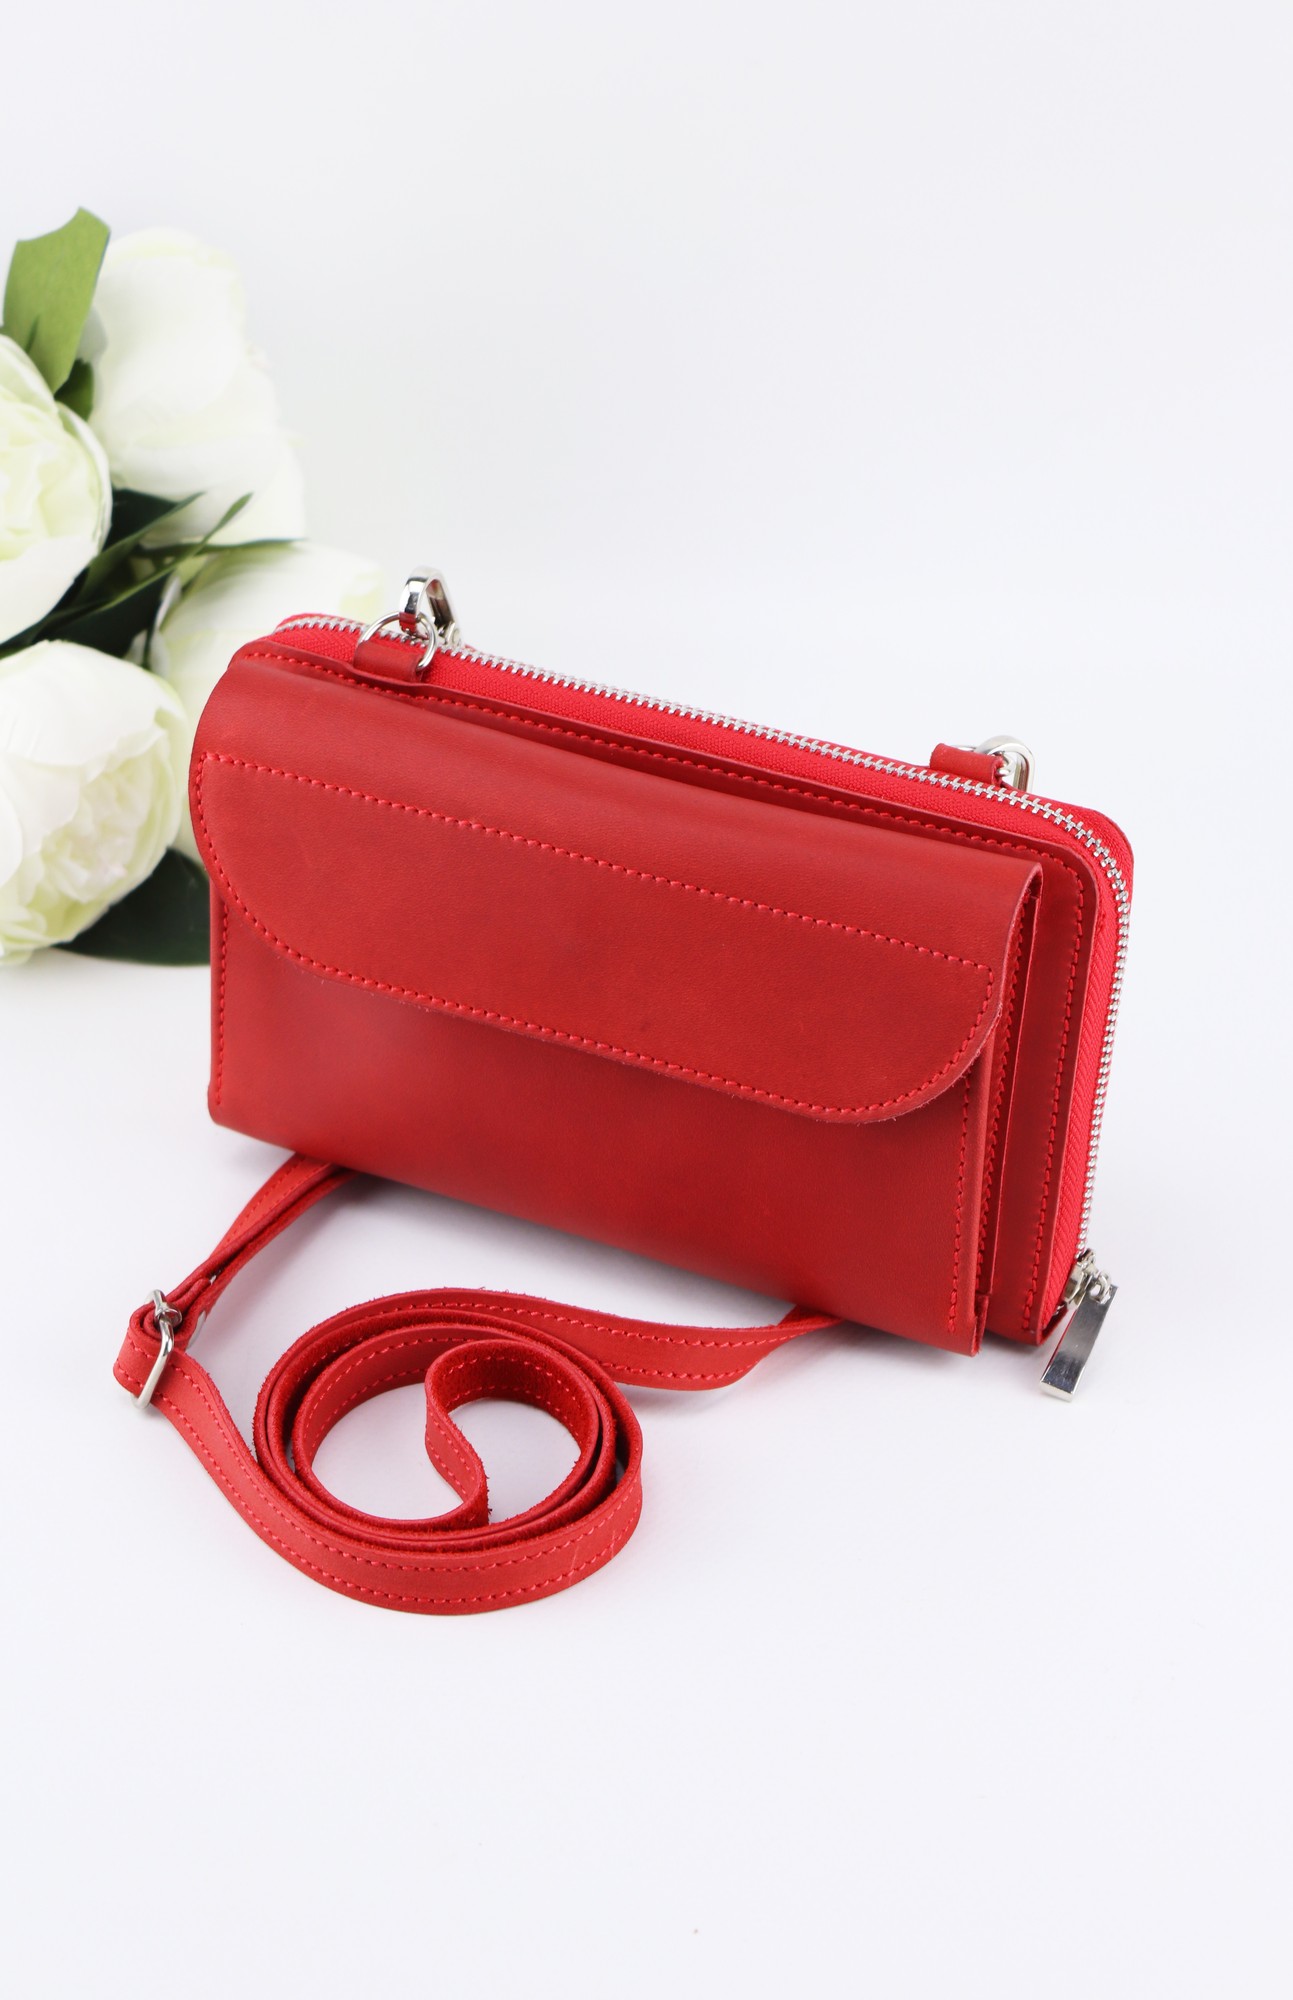 Leather Smartphone Crossbody Small Bag for Women/ Purse for iPhone 14 Pro with Wrist Strap/ Red/ 1011. Made in Ukraine